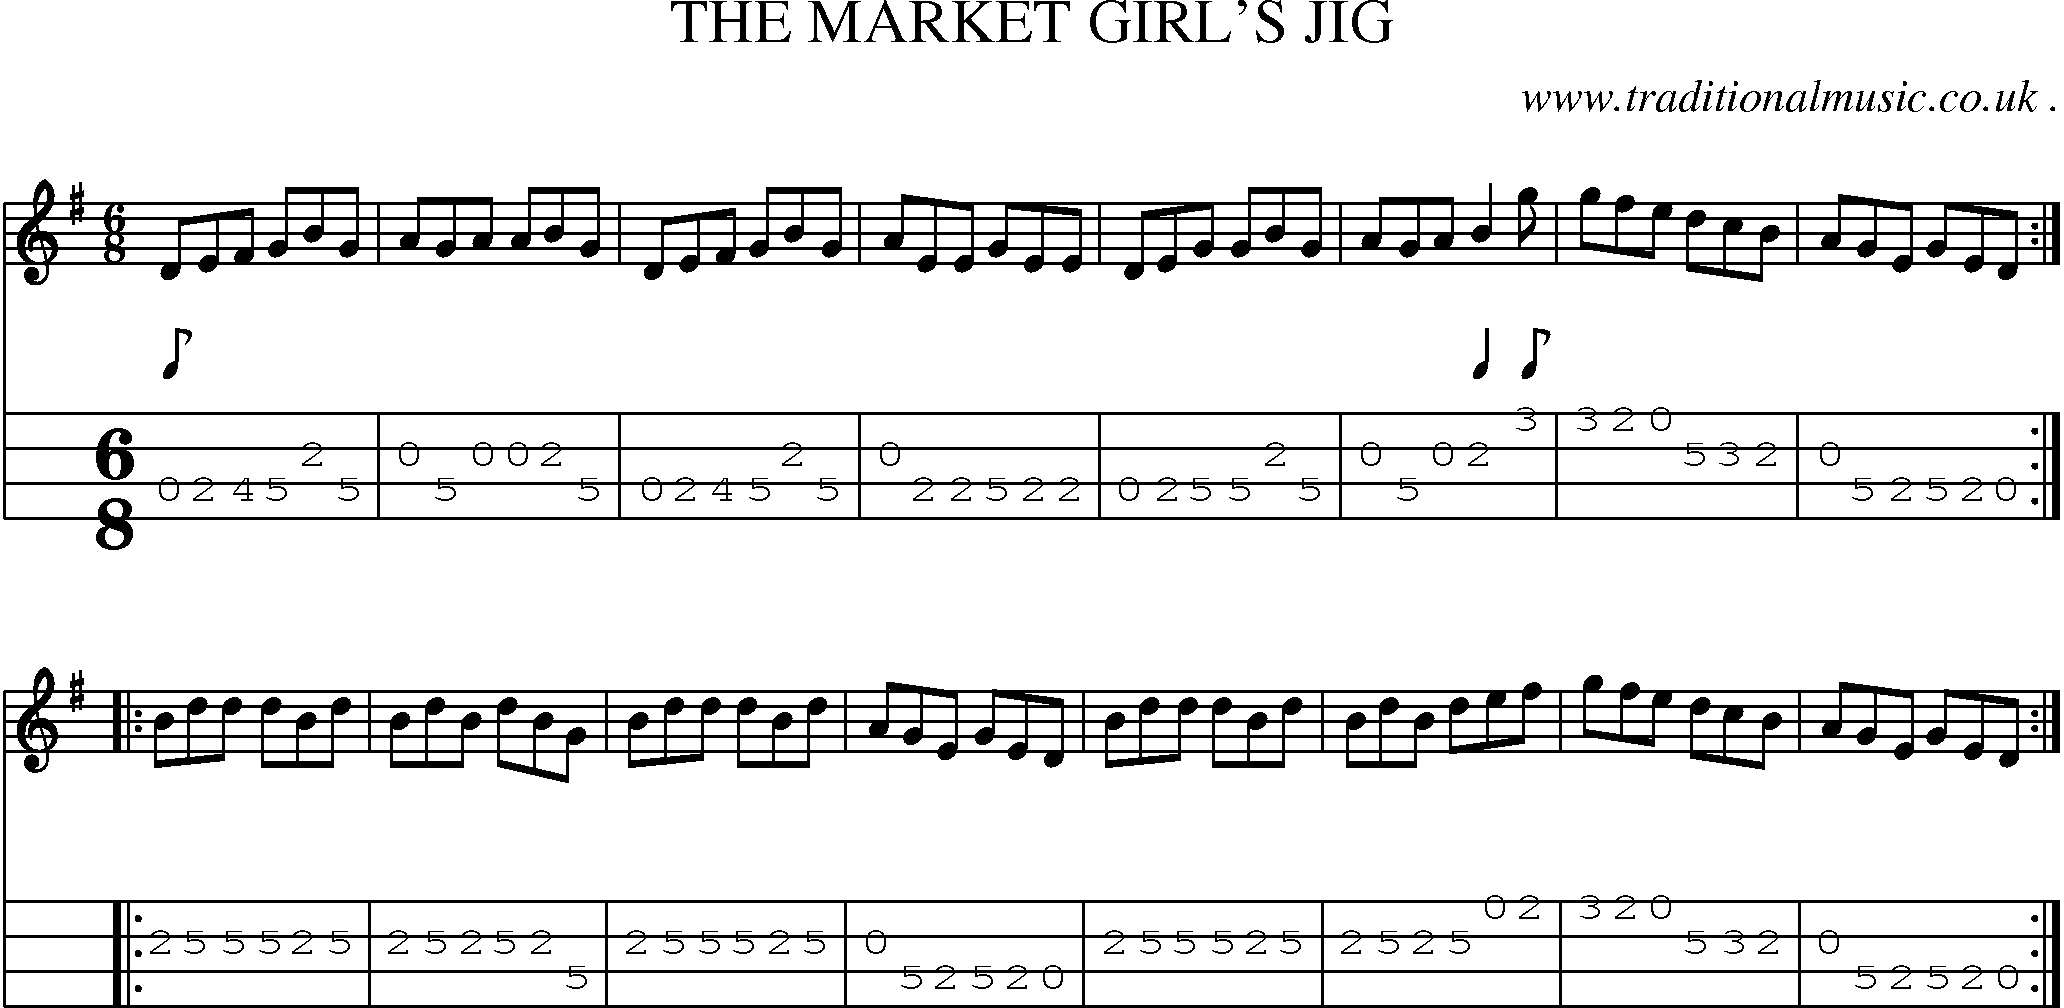 Sheet-Music and Mandolin Tabs for The Market Girls Jig